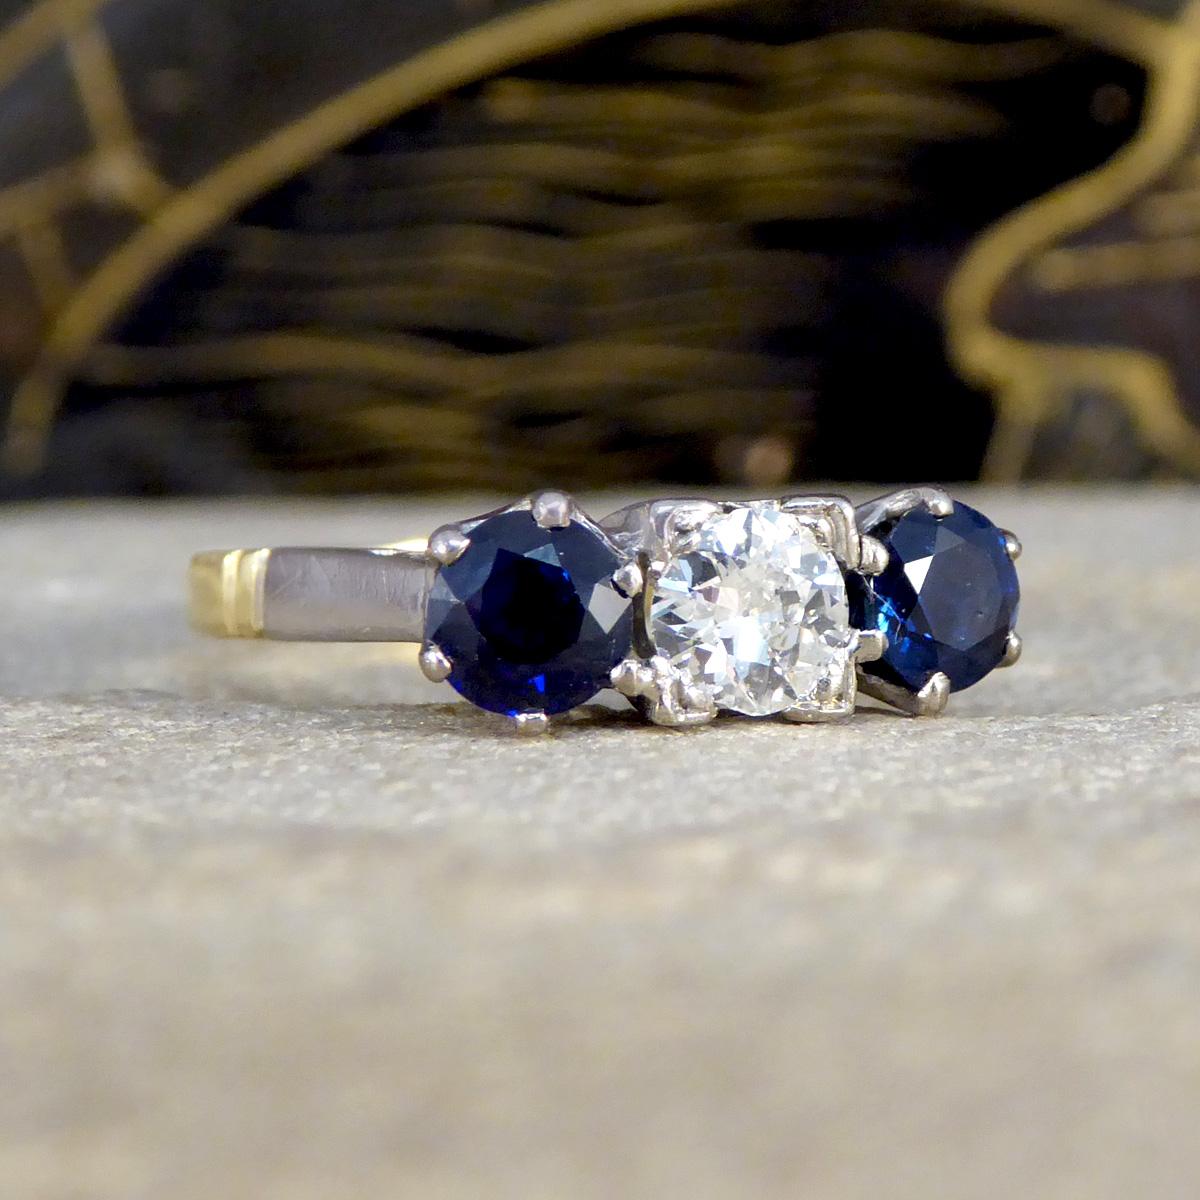 Discover the timeless elegance of our vintage Sapphire and Diamond three stone ring, masterfully crafted with an 18ct yellow gold band and an 18ct white gold setting. At the heart of this exquisite piece lies a radiant diamond, flanked on either